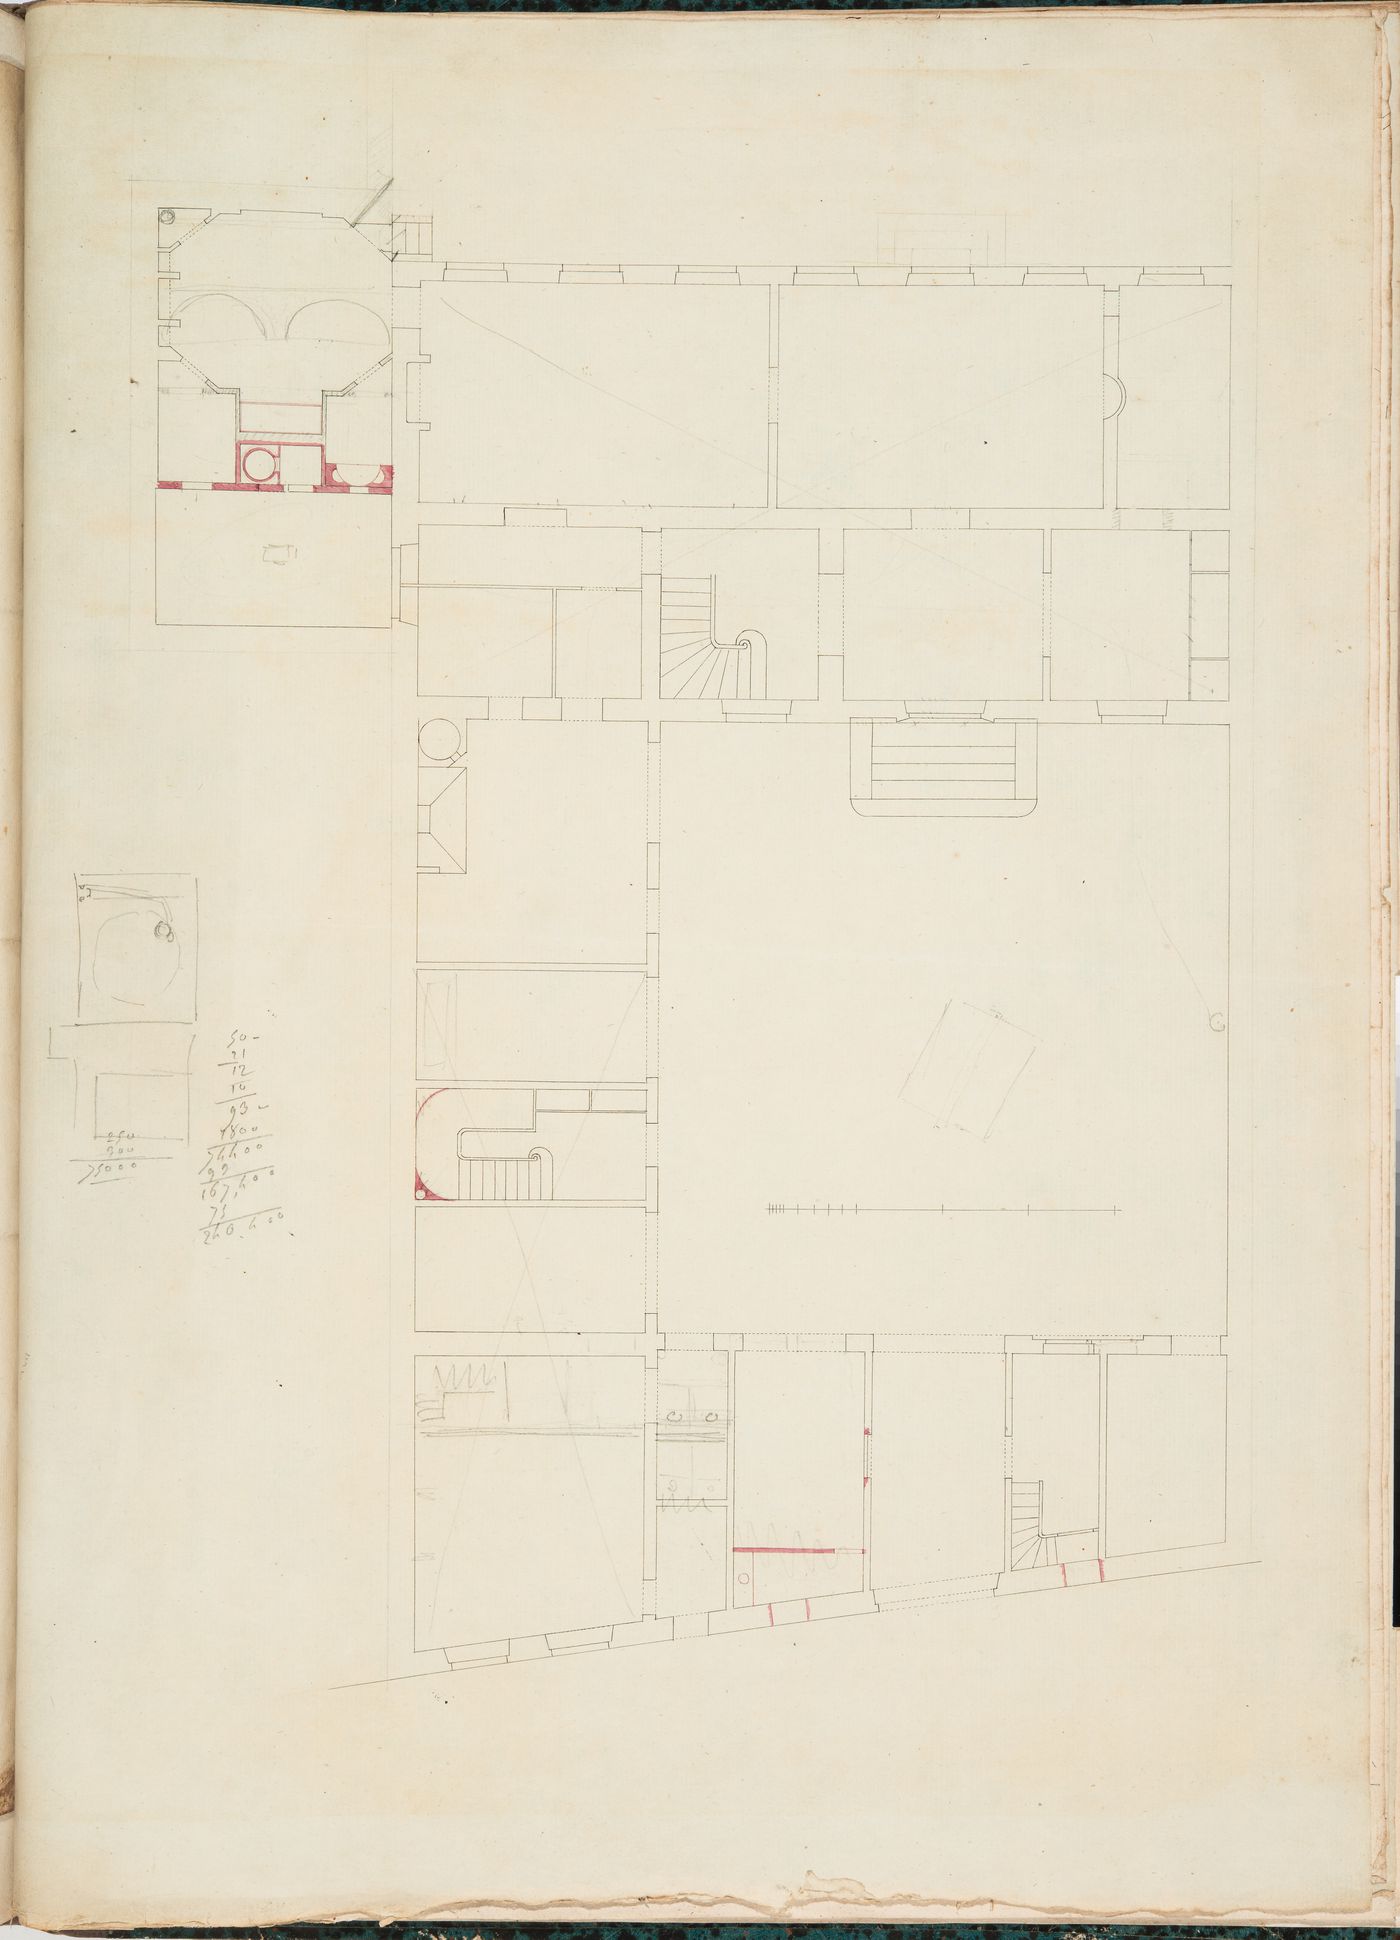 Project for renovations for a house for M. le Dhuy: Ground floor plan